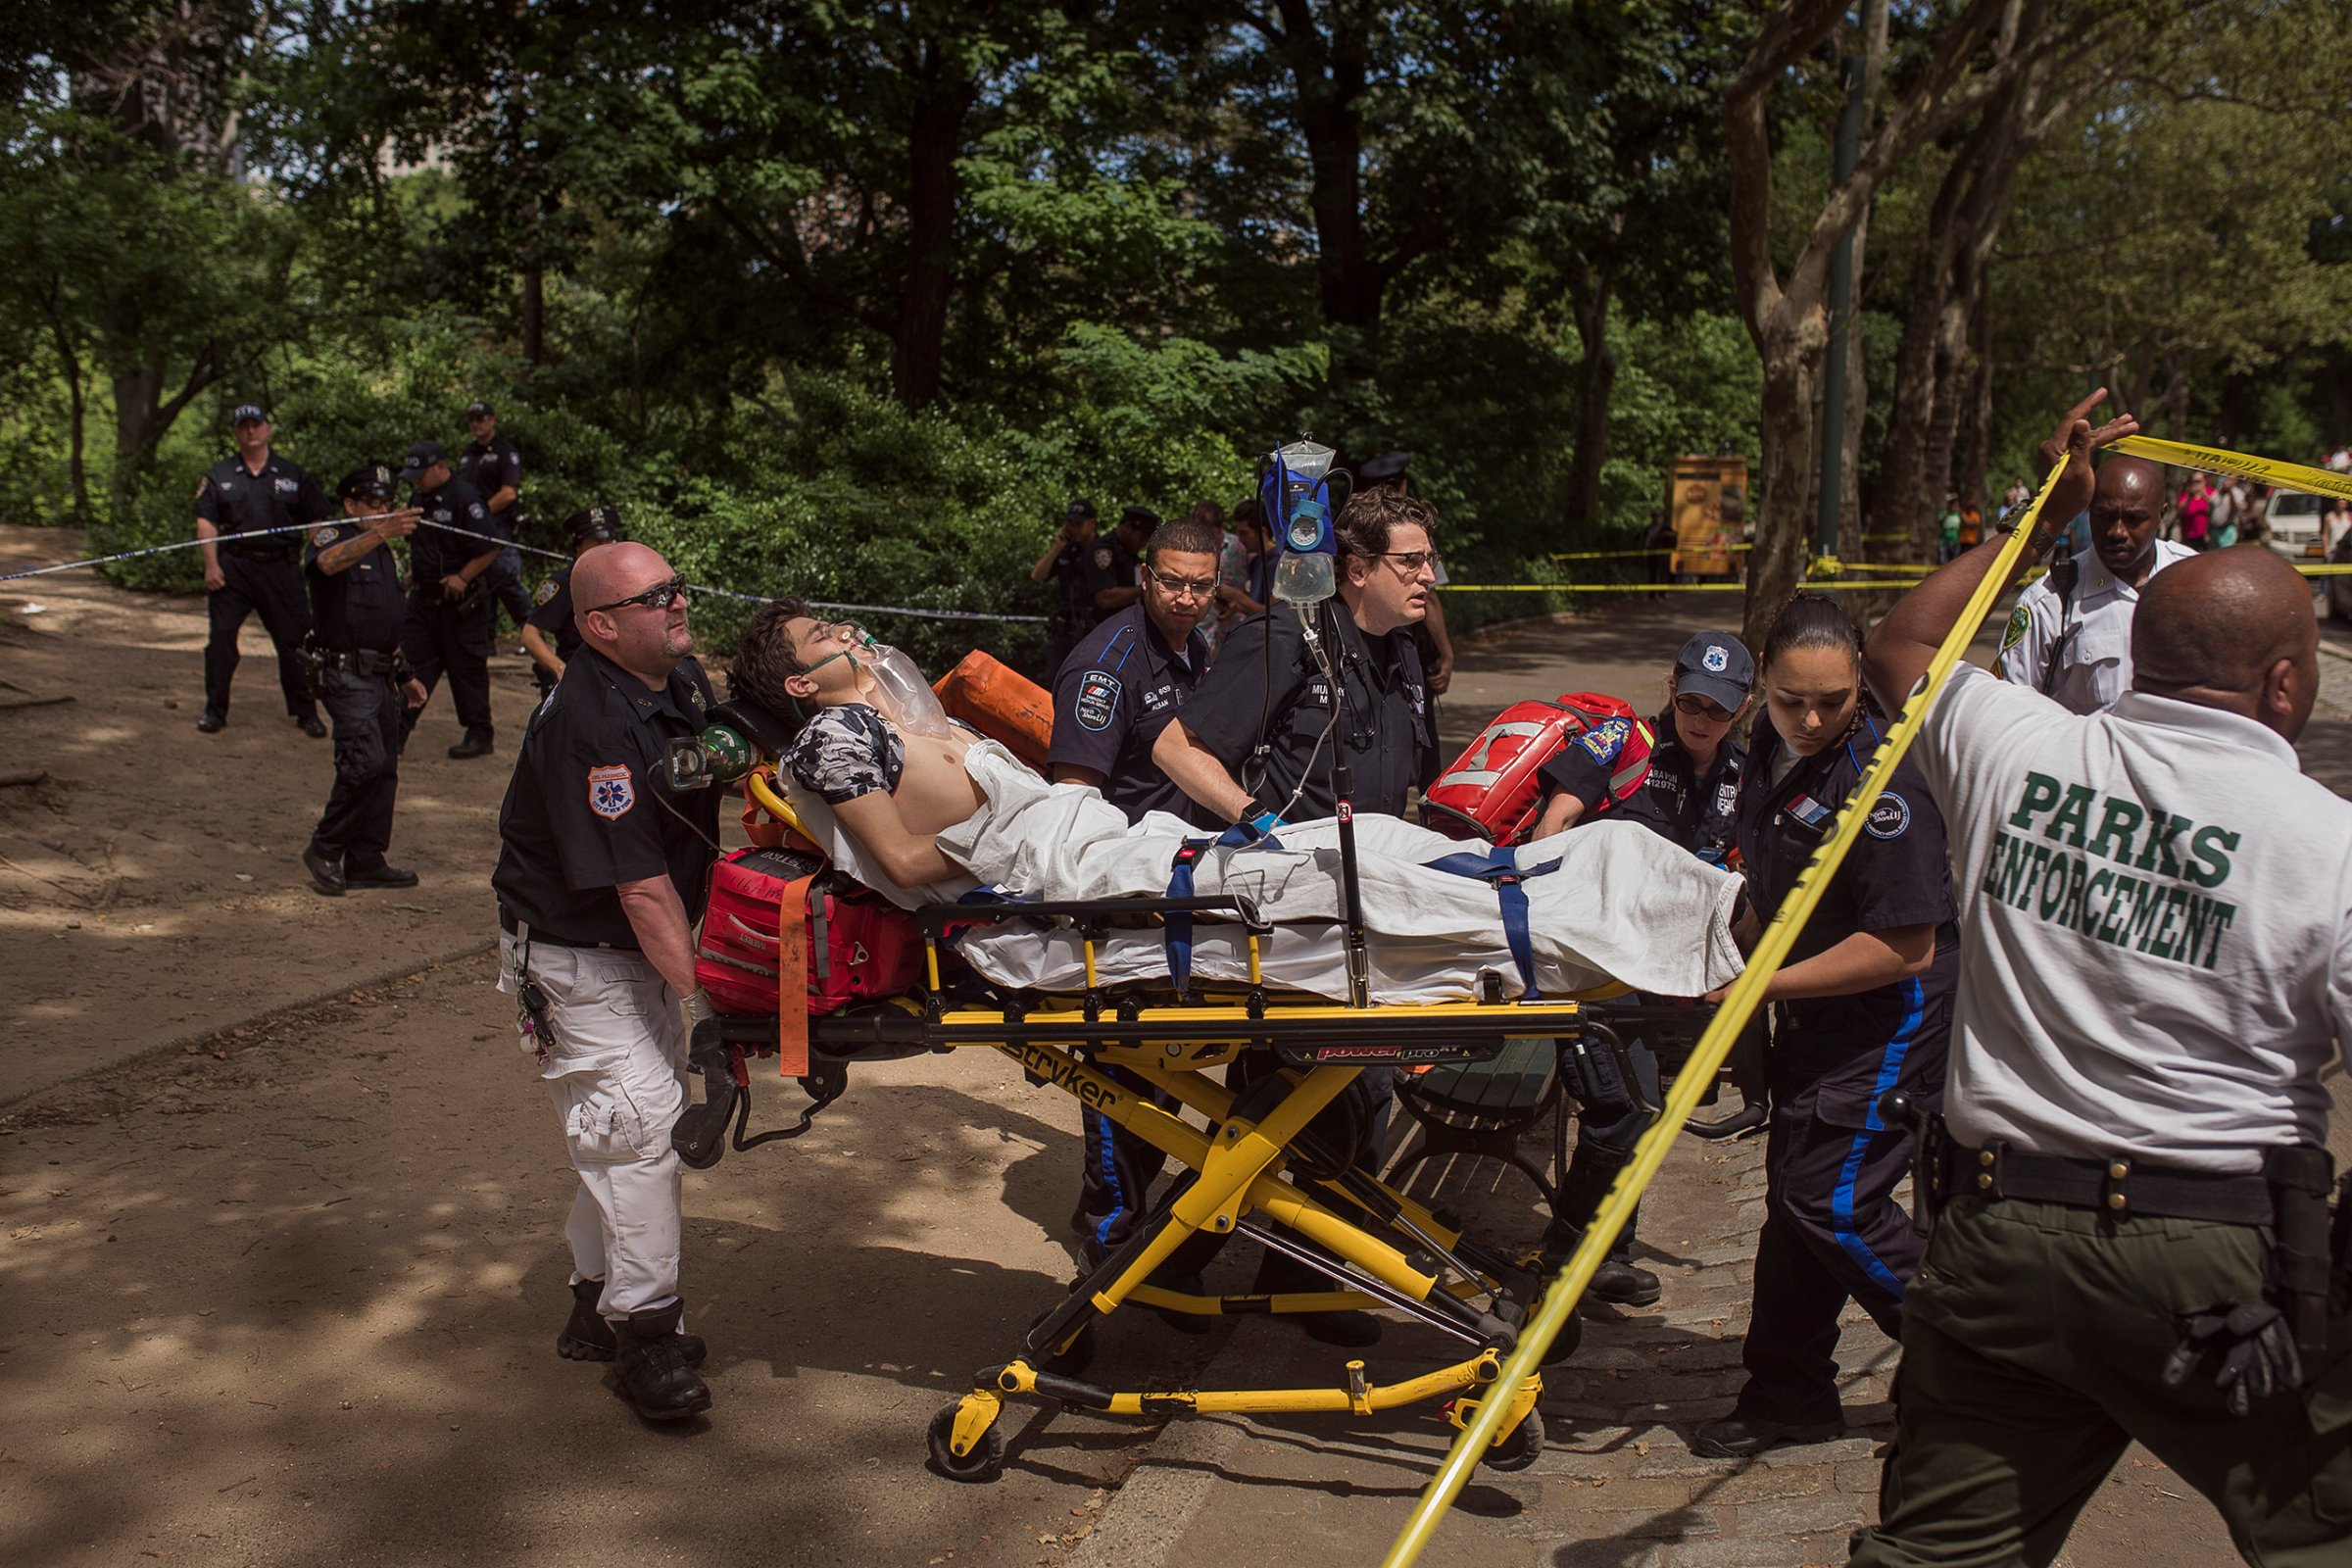 A injured man is carried to an ambulance in Central Park in New York City on July 3, 2016.